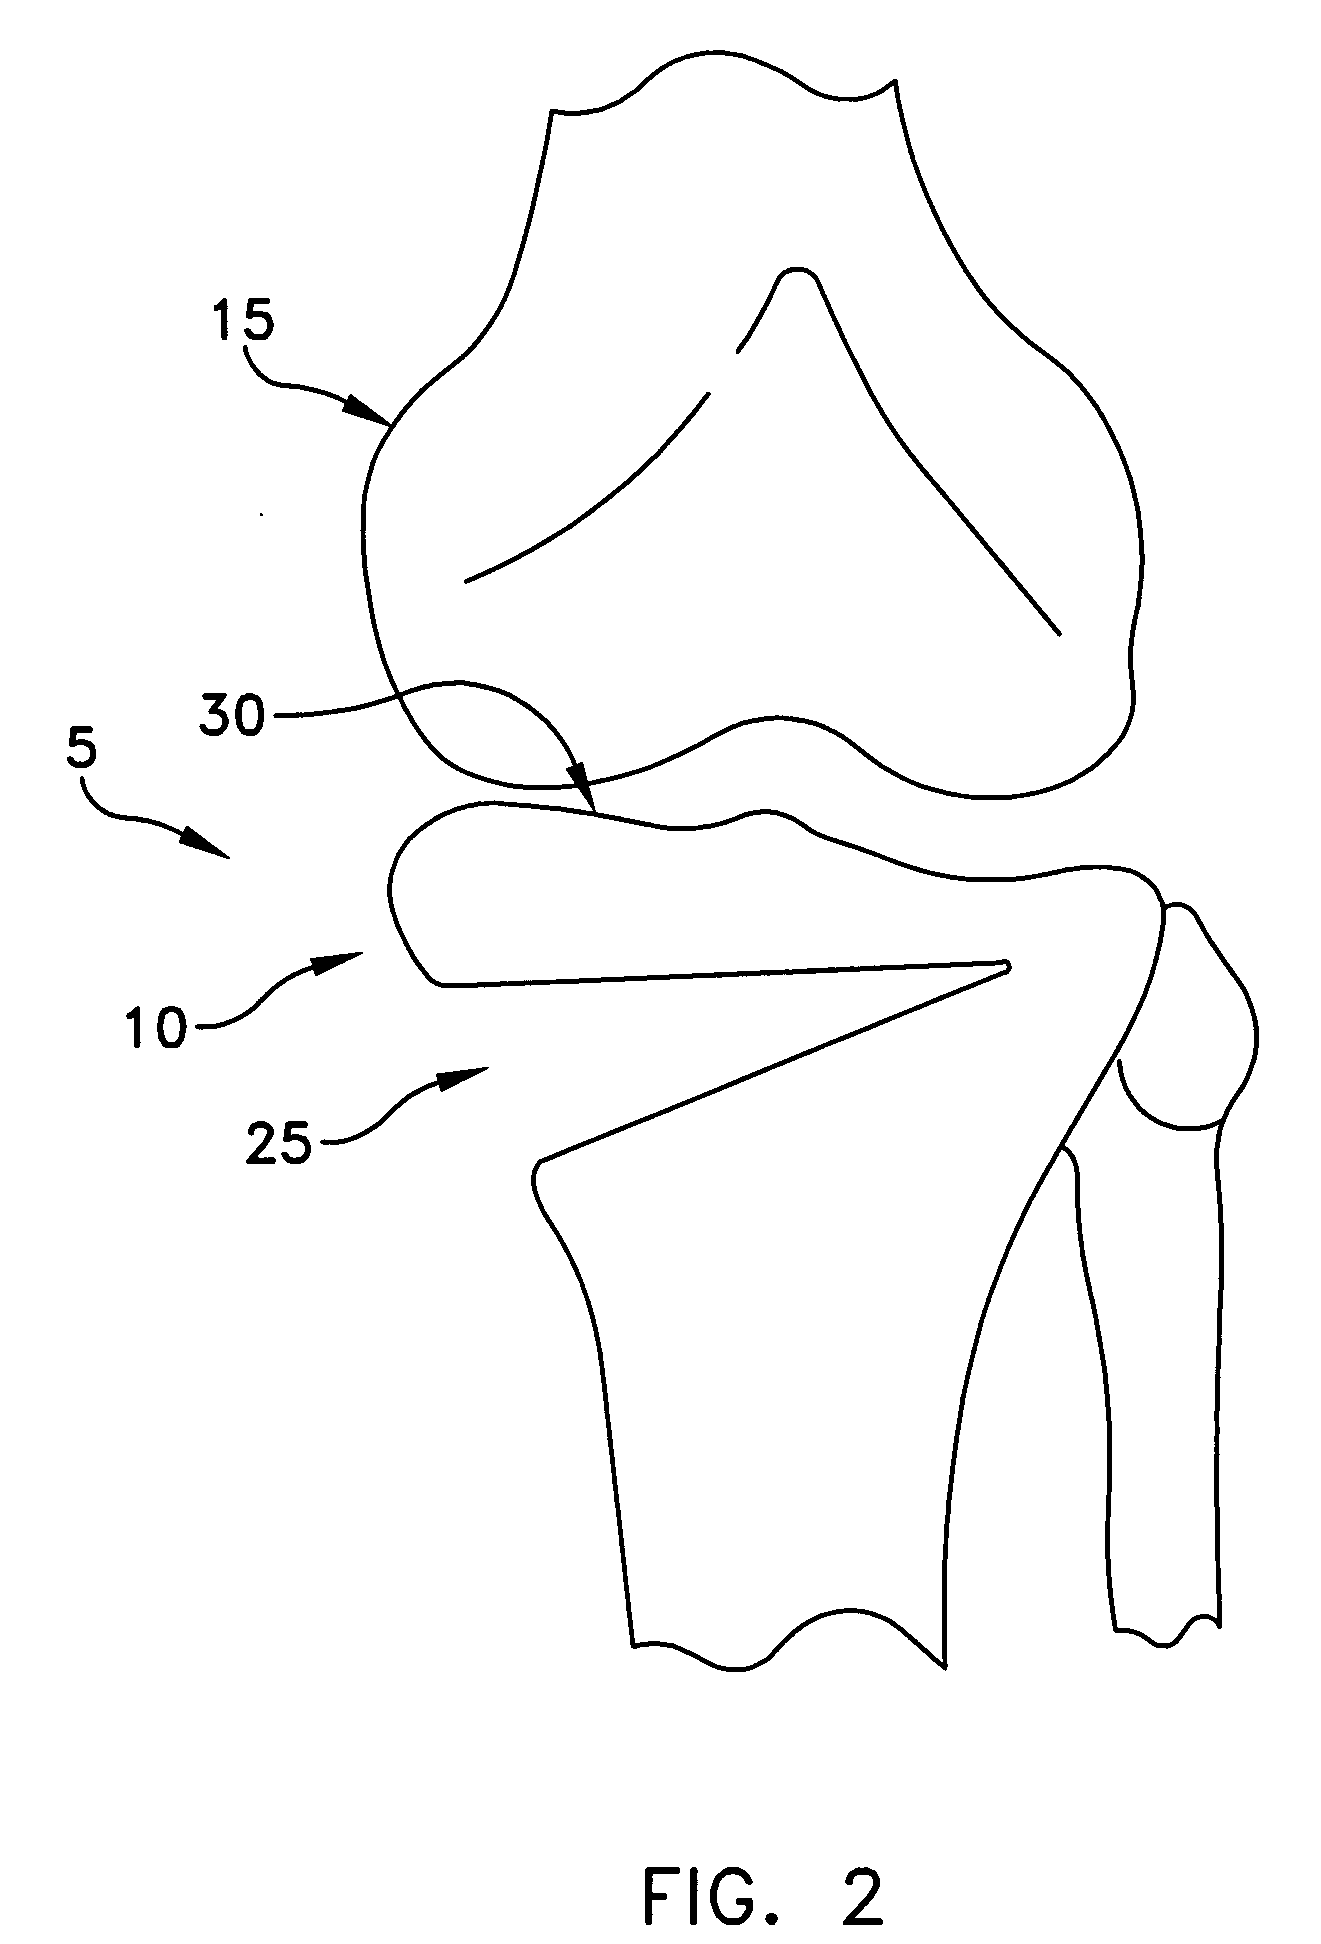 Method and apparatus for performing an open wedge, high tibial osteotomy